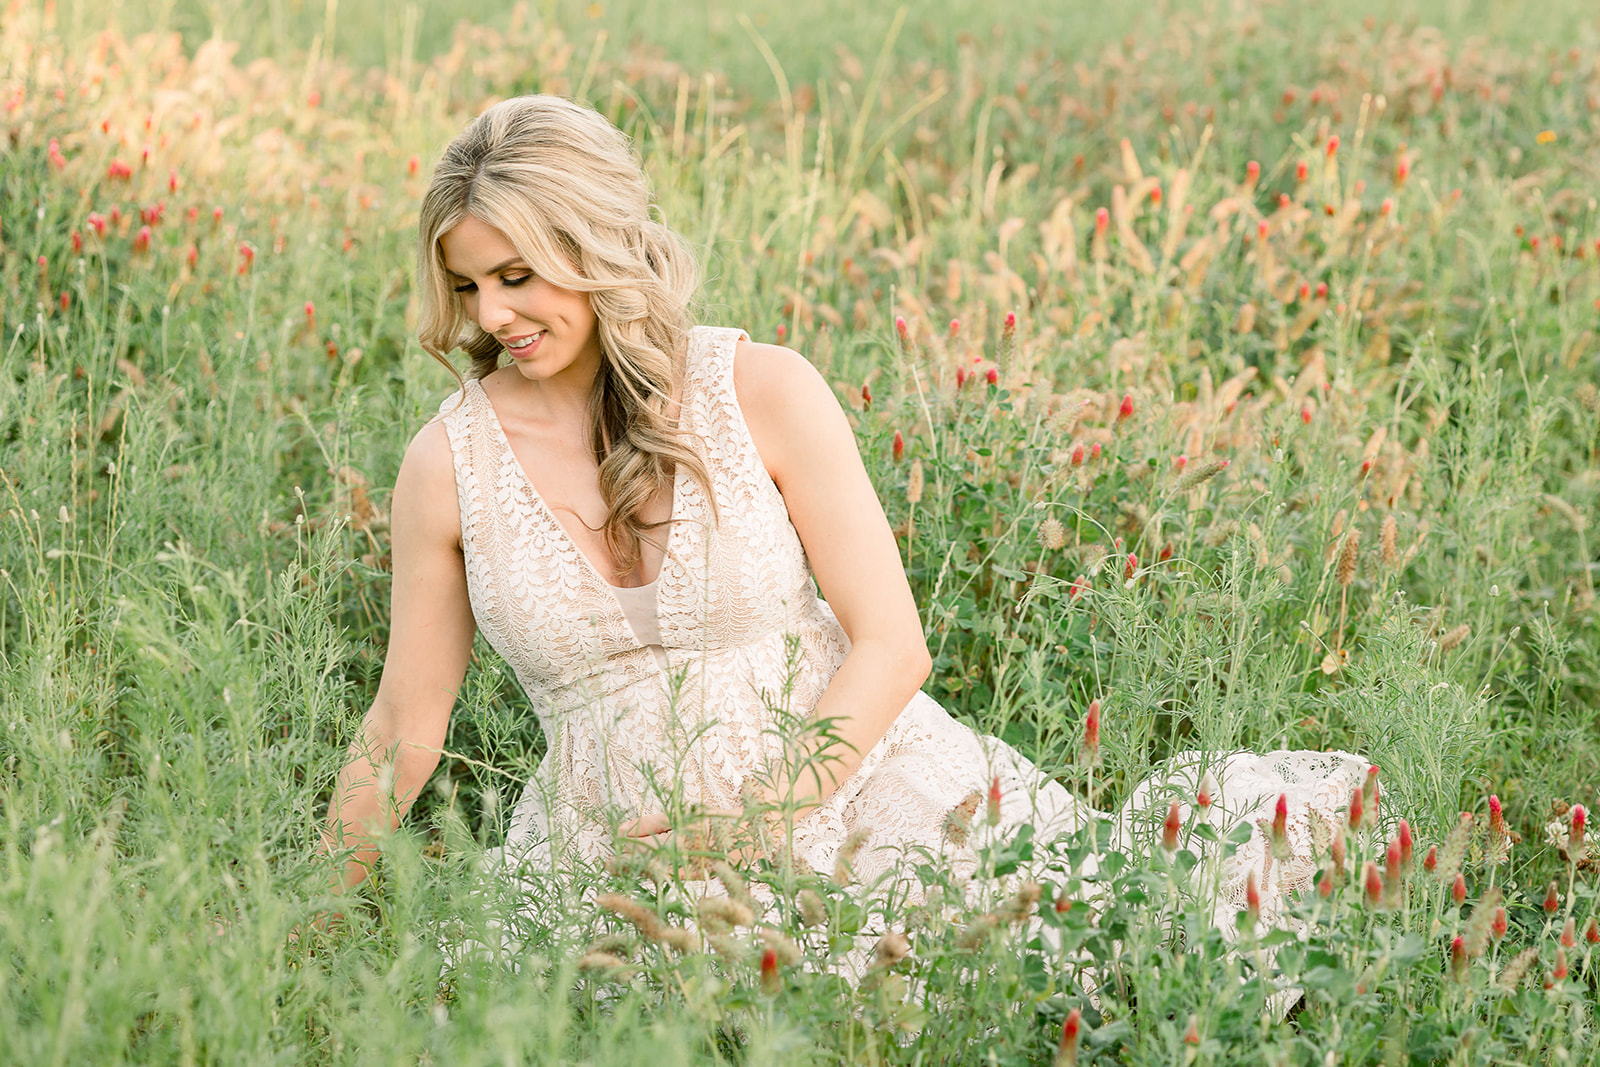 A mom to be in a beige lace maternity gown sits in a field of red wildflowers while smiling